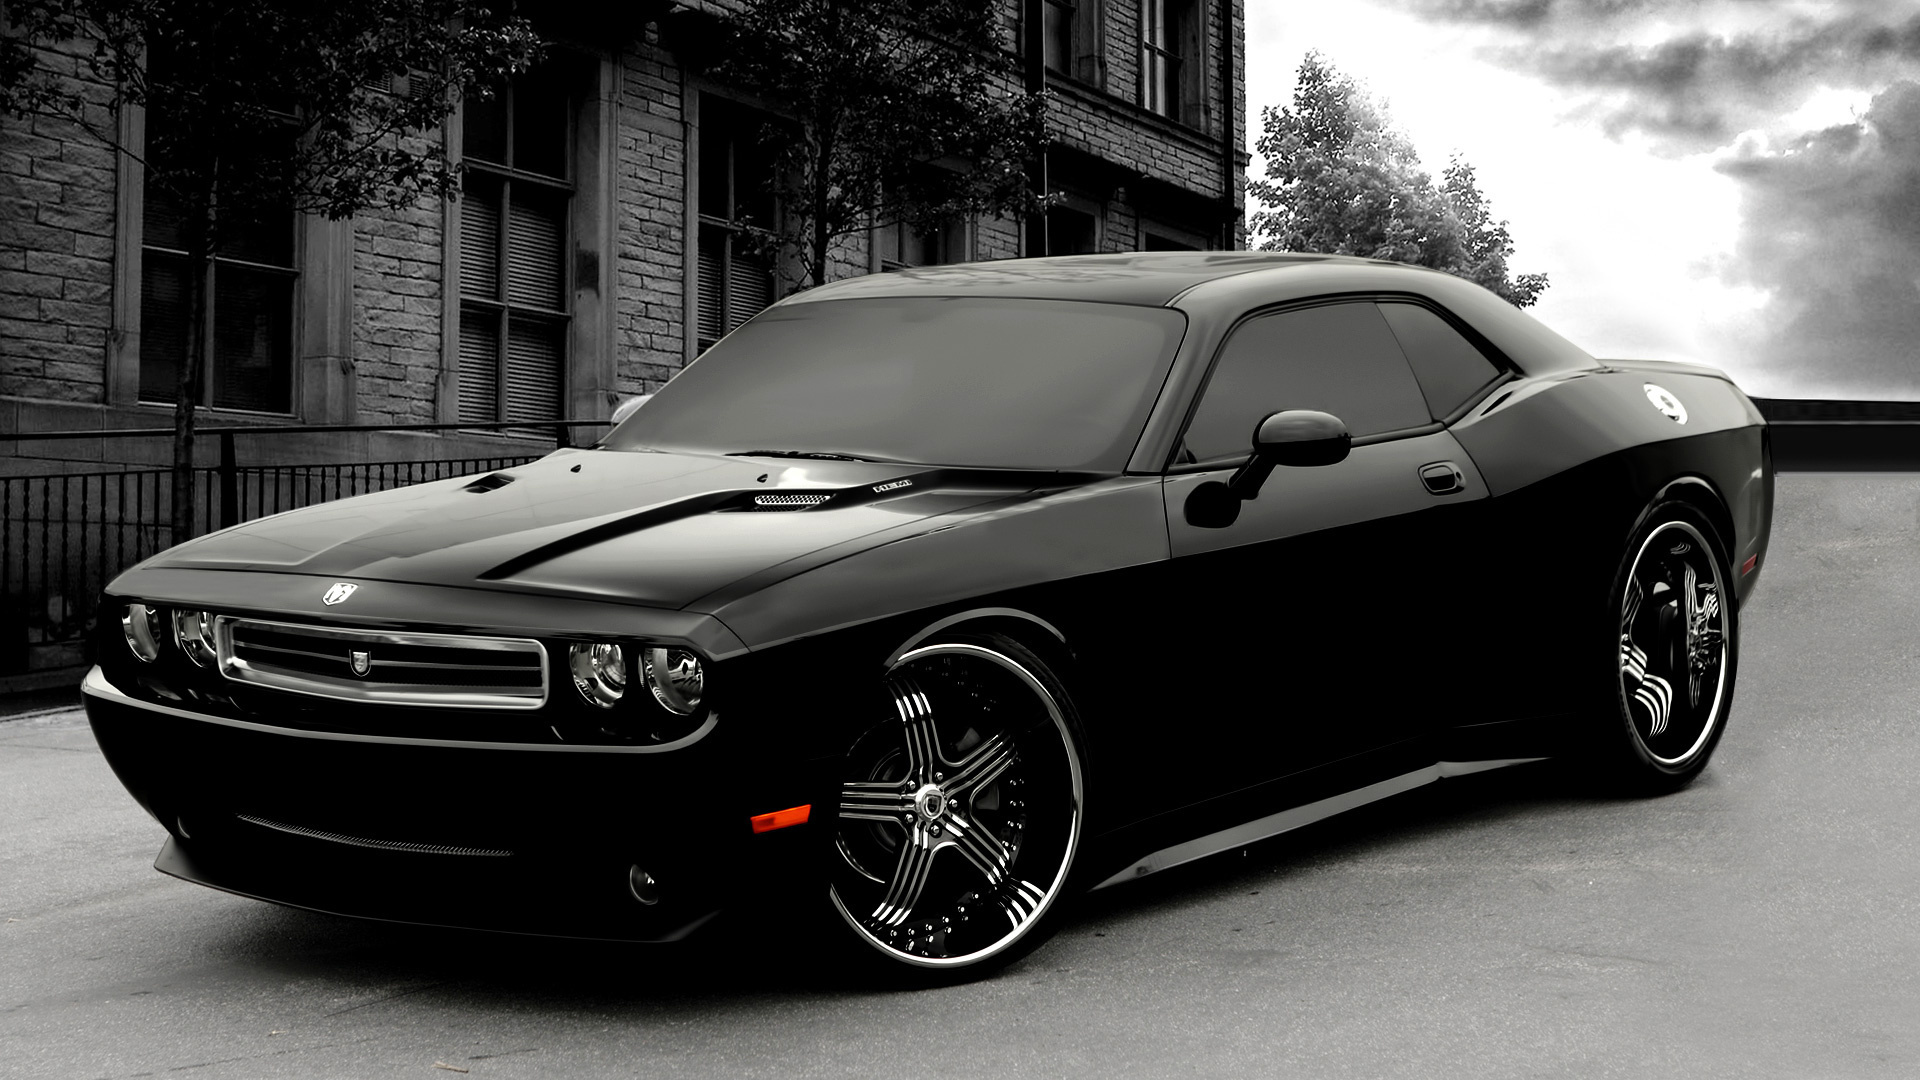 Dodge Challenger HD wallpapers, Classic and iconic, Raw power and performance, Unforgettable presence, 1920x1080 Full HD Desktop